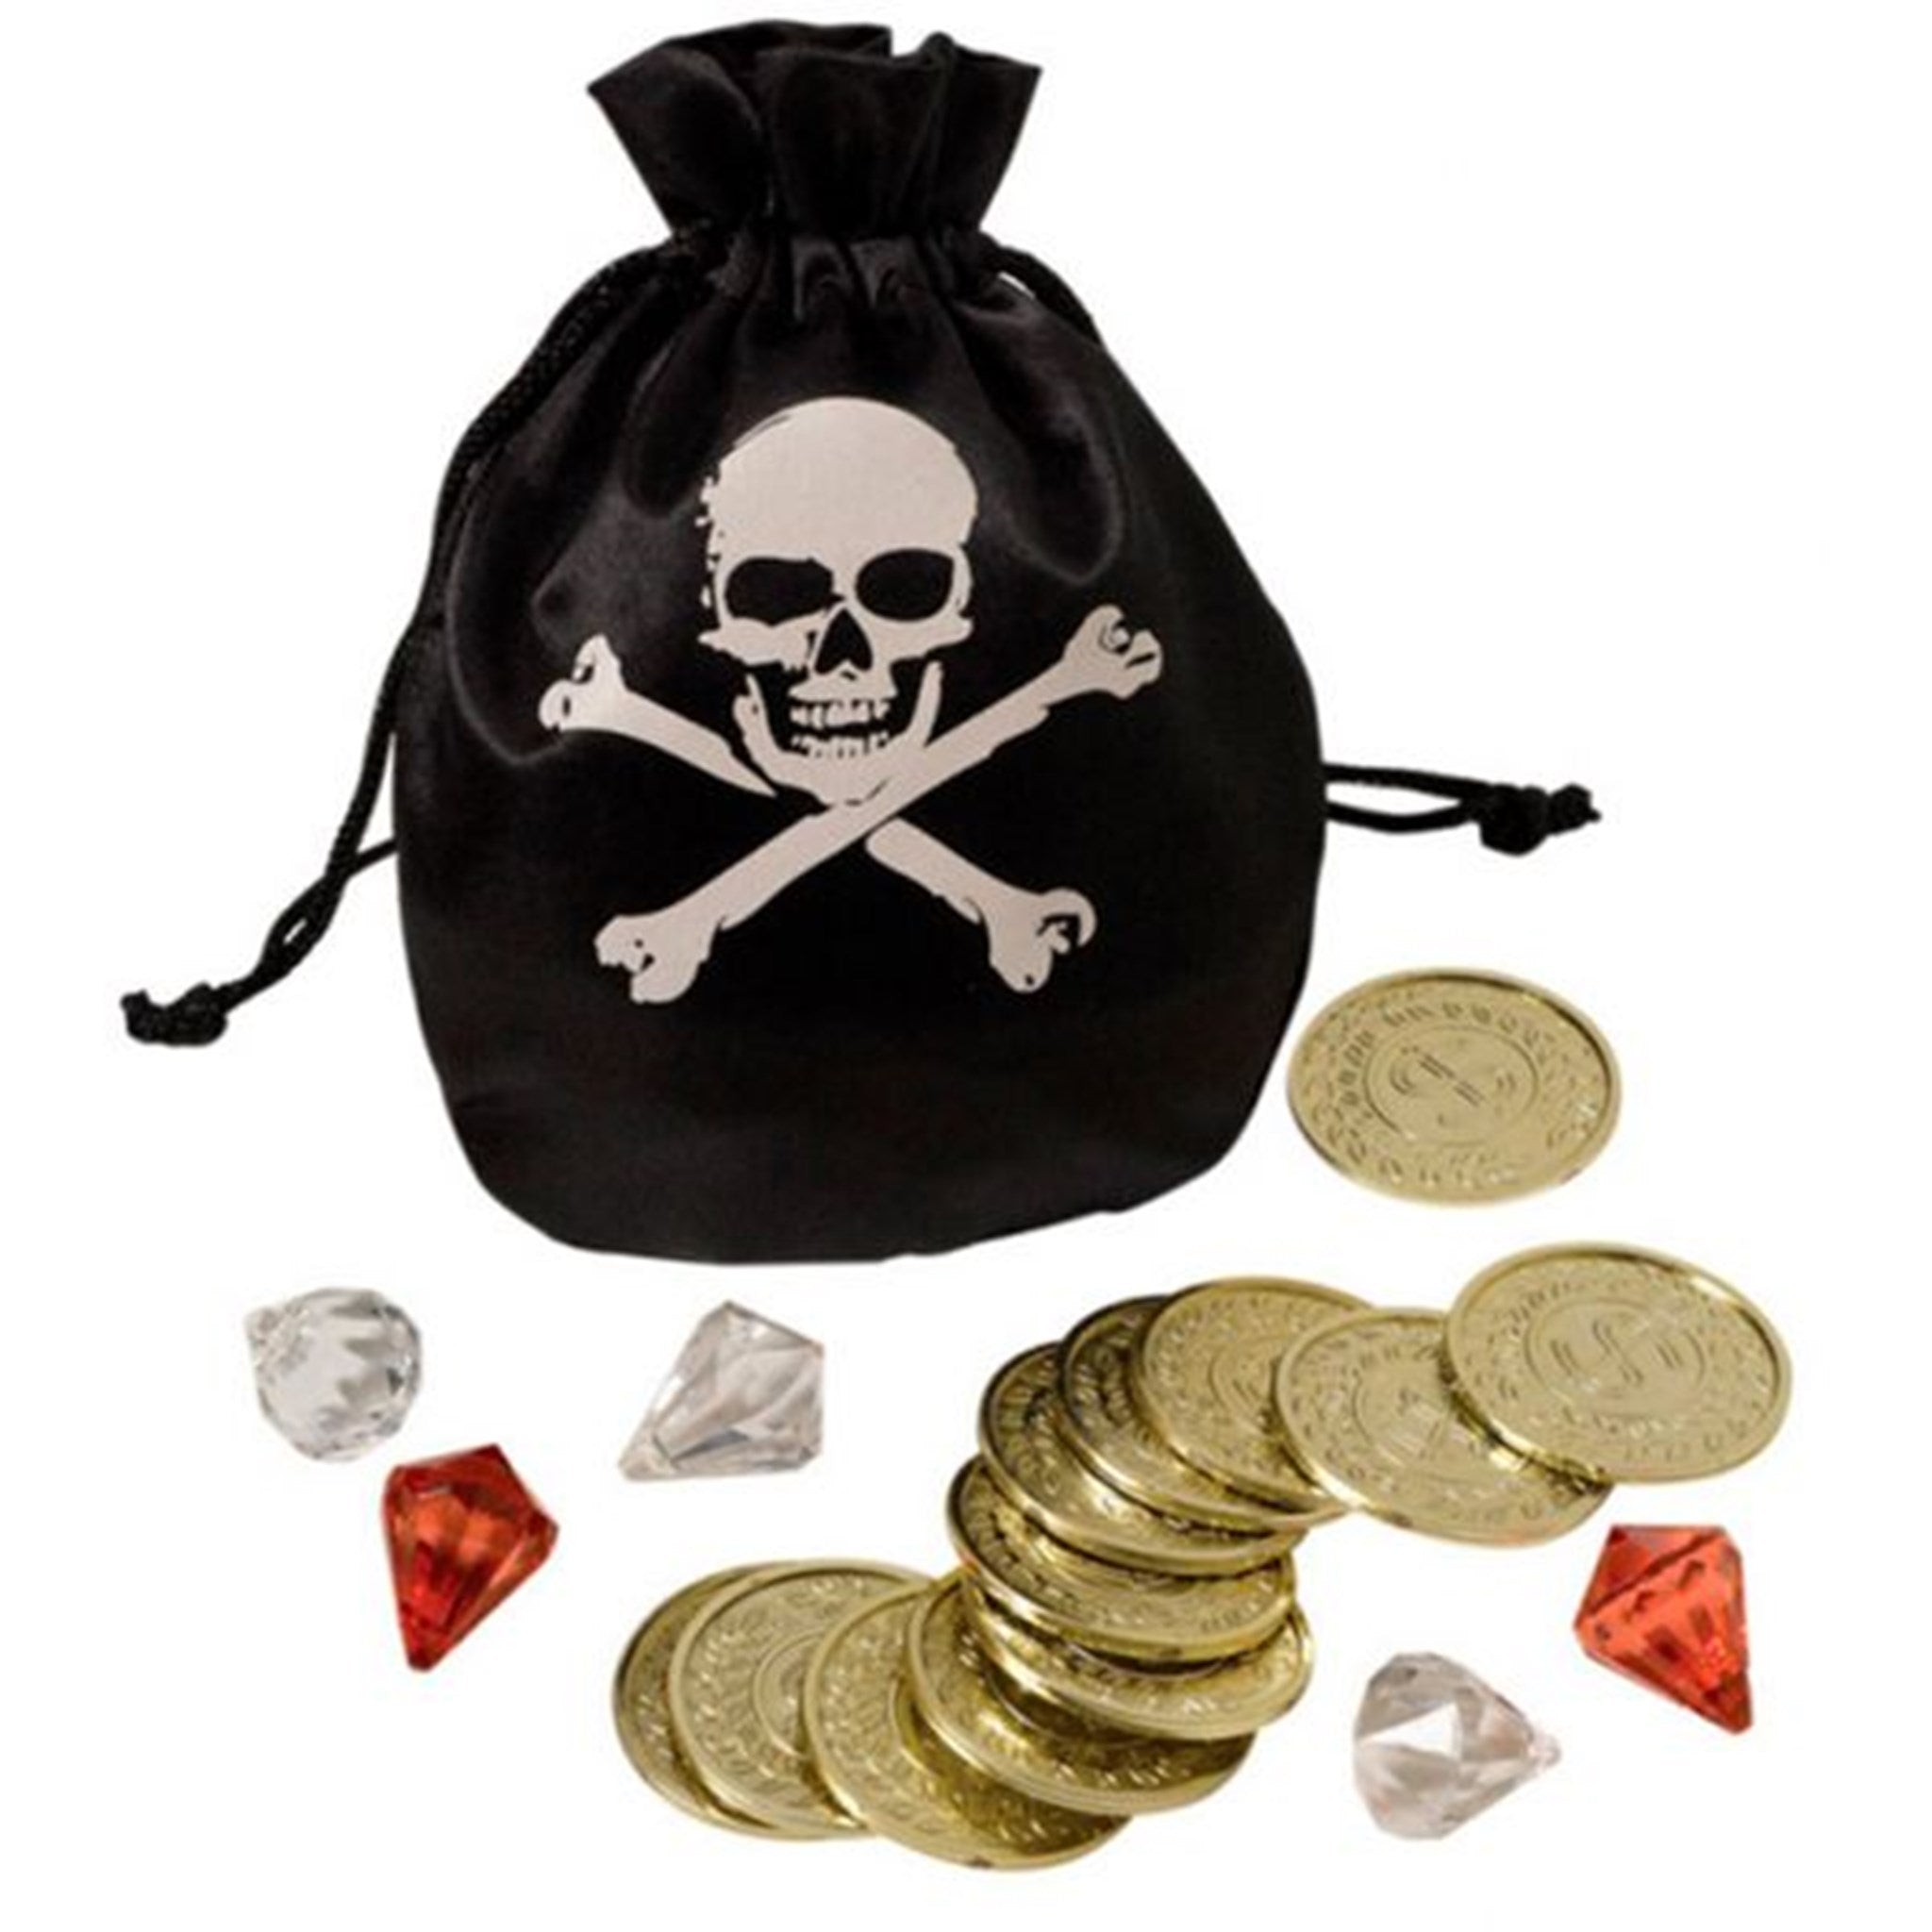 MaMaMeMo Pirate's Wallet with Gold Coins